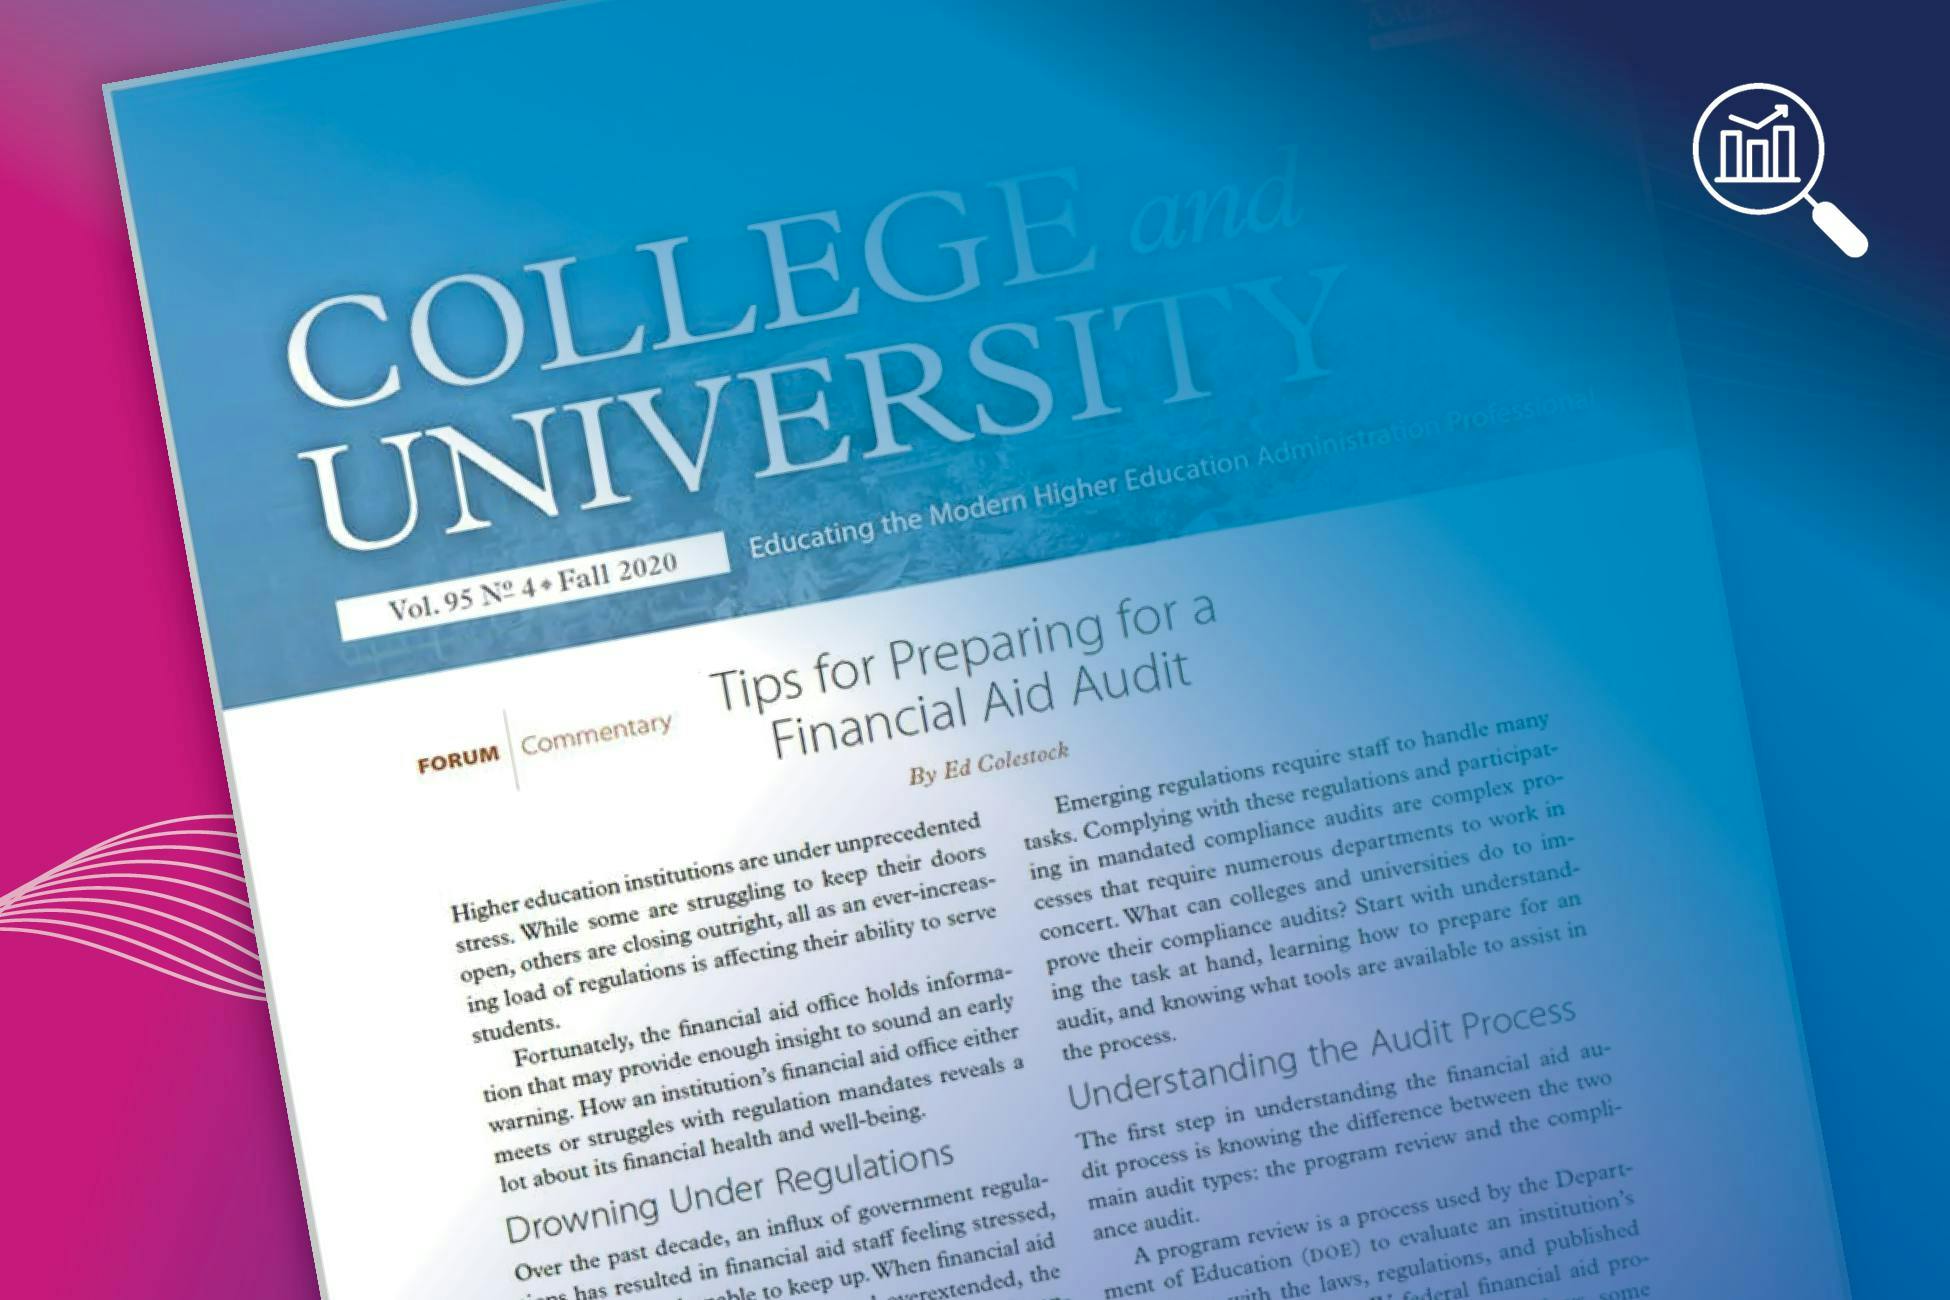 Industry Insight: Tips for Preparing for a Financial Aid Audit